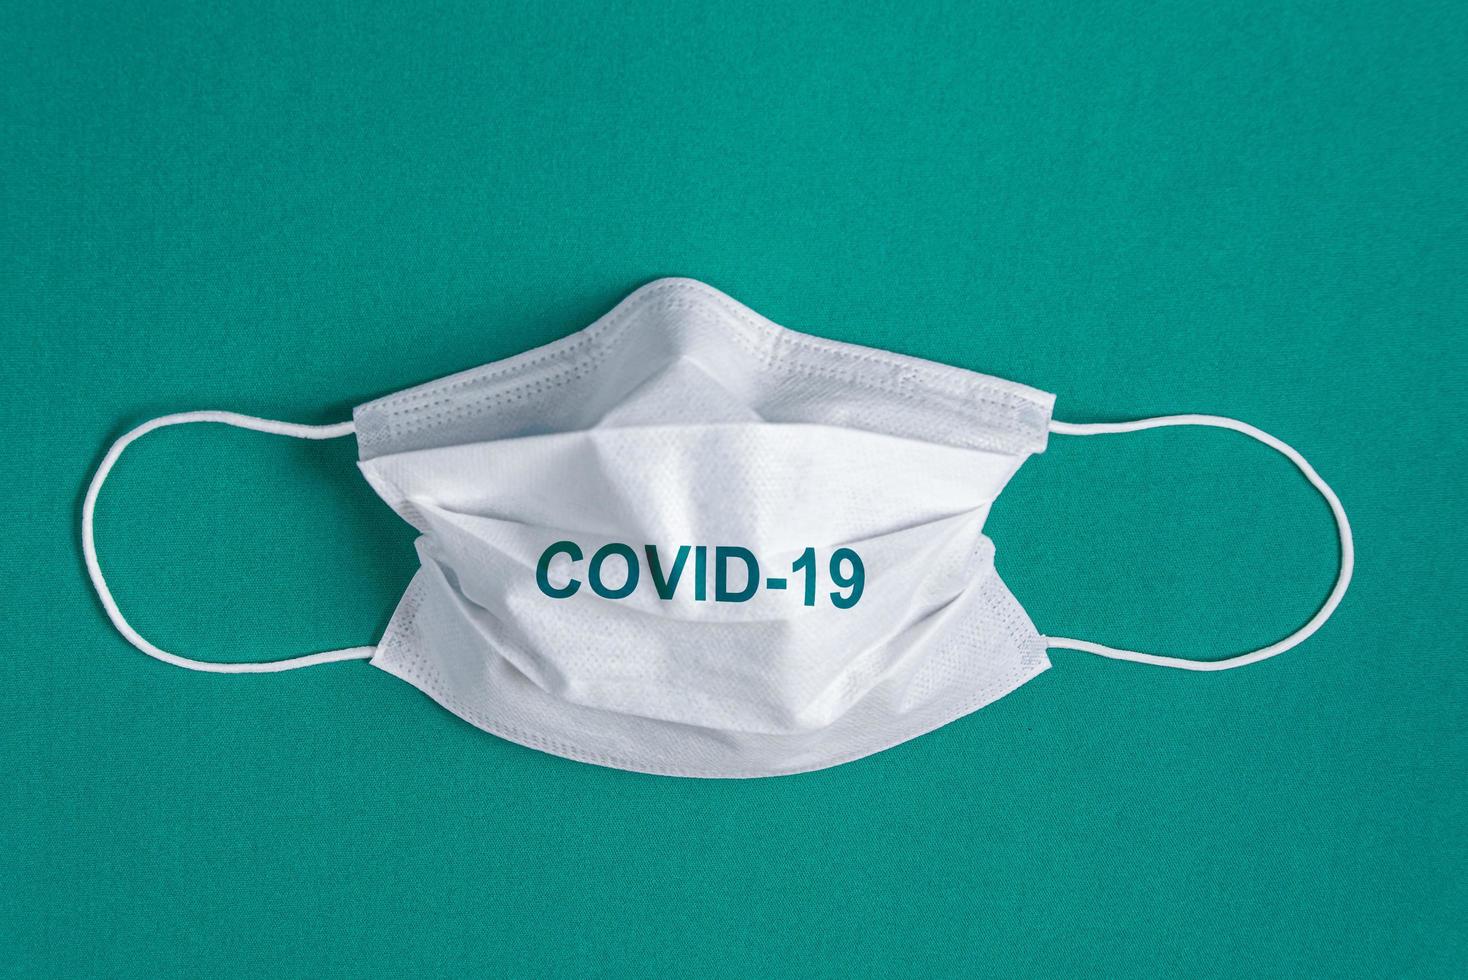 Surgical mask over minimalist green background photo